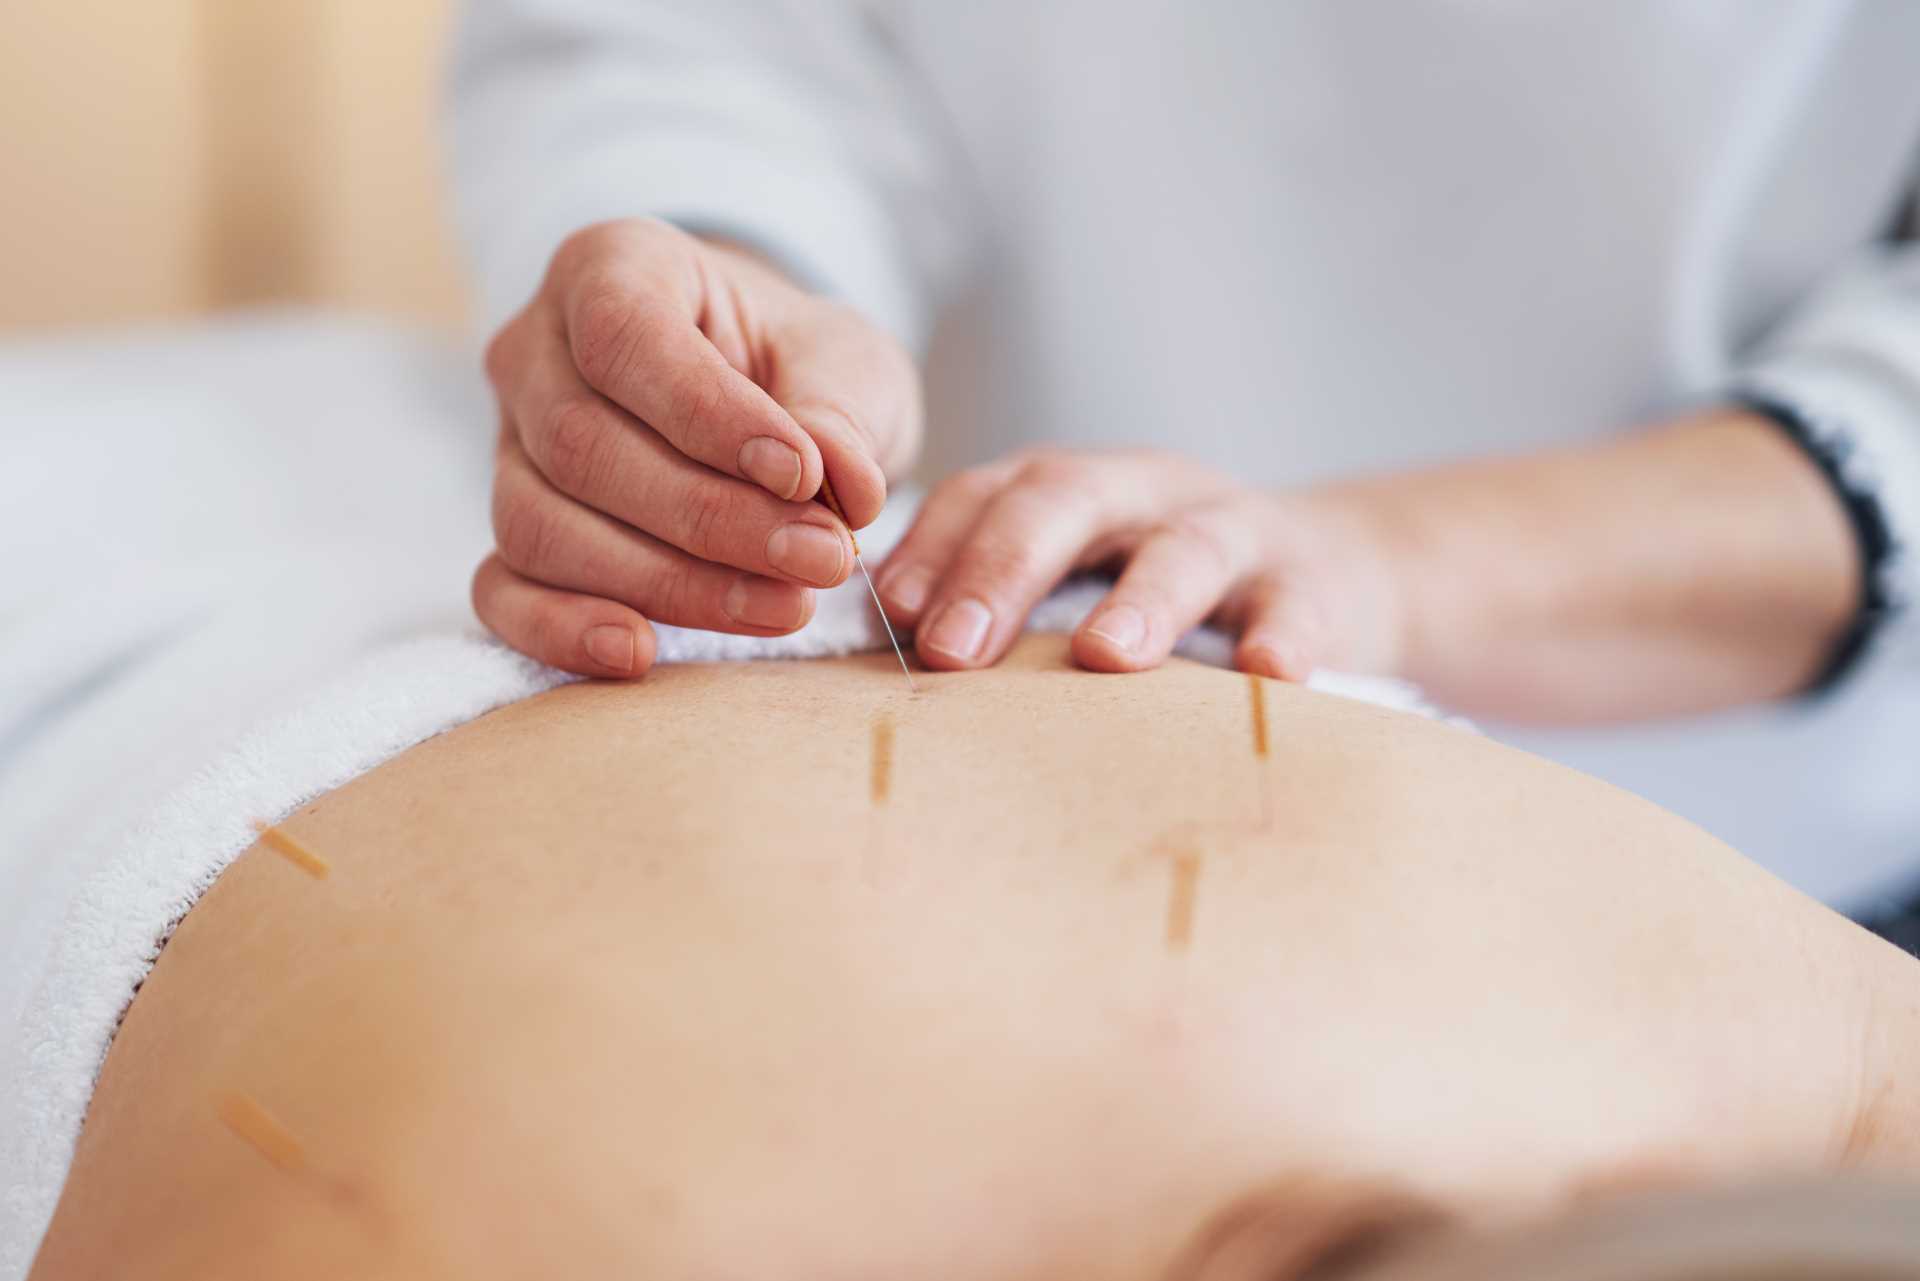 Acupunture needle therapy being conducted on a back | Featured image for the Benefits of Needling Therapy blog from Refine Health Group.